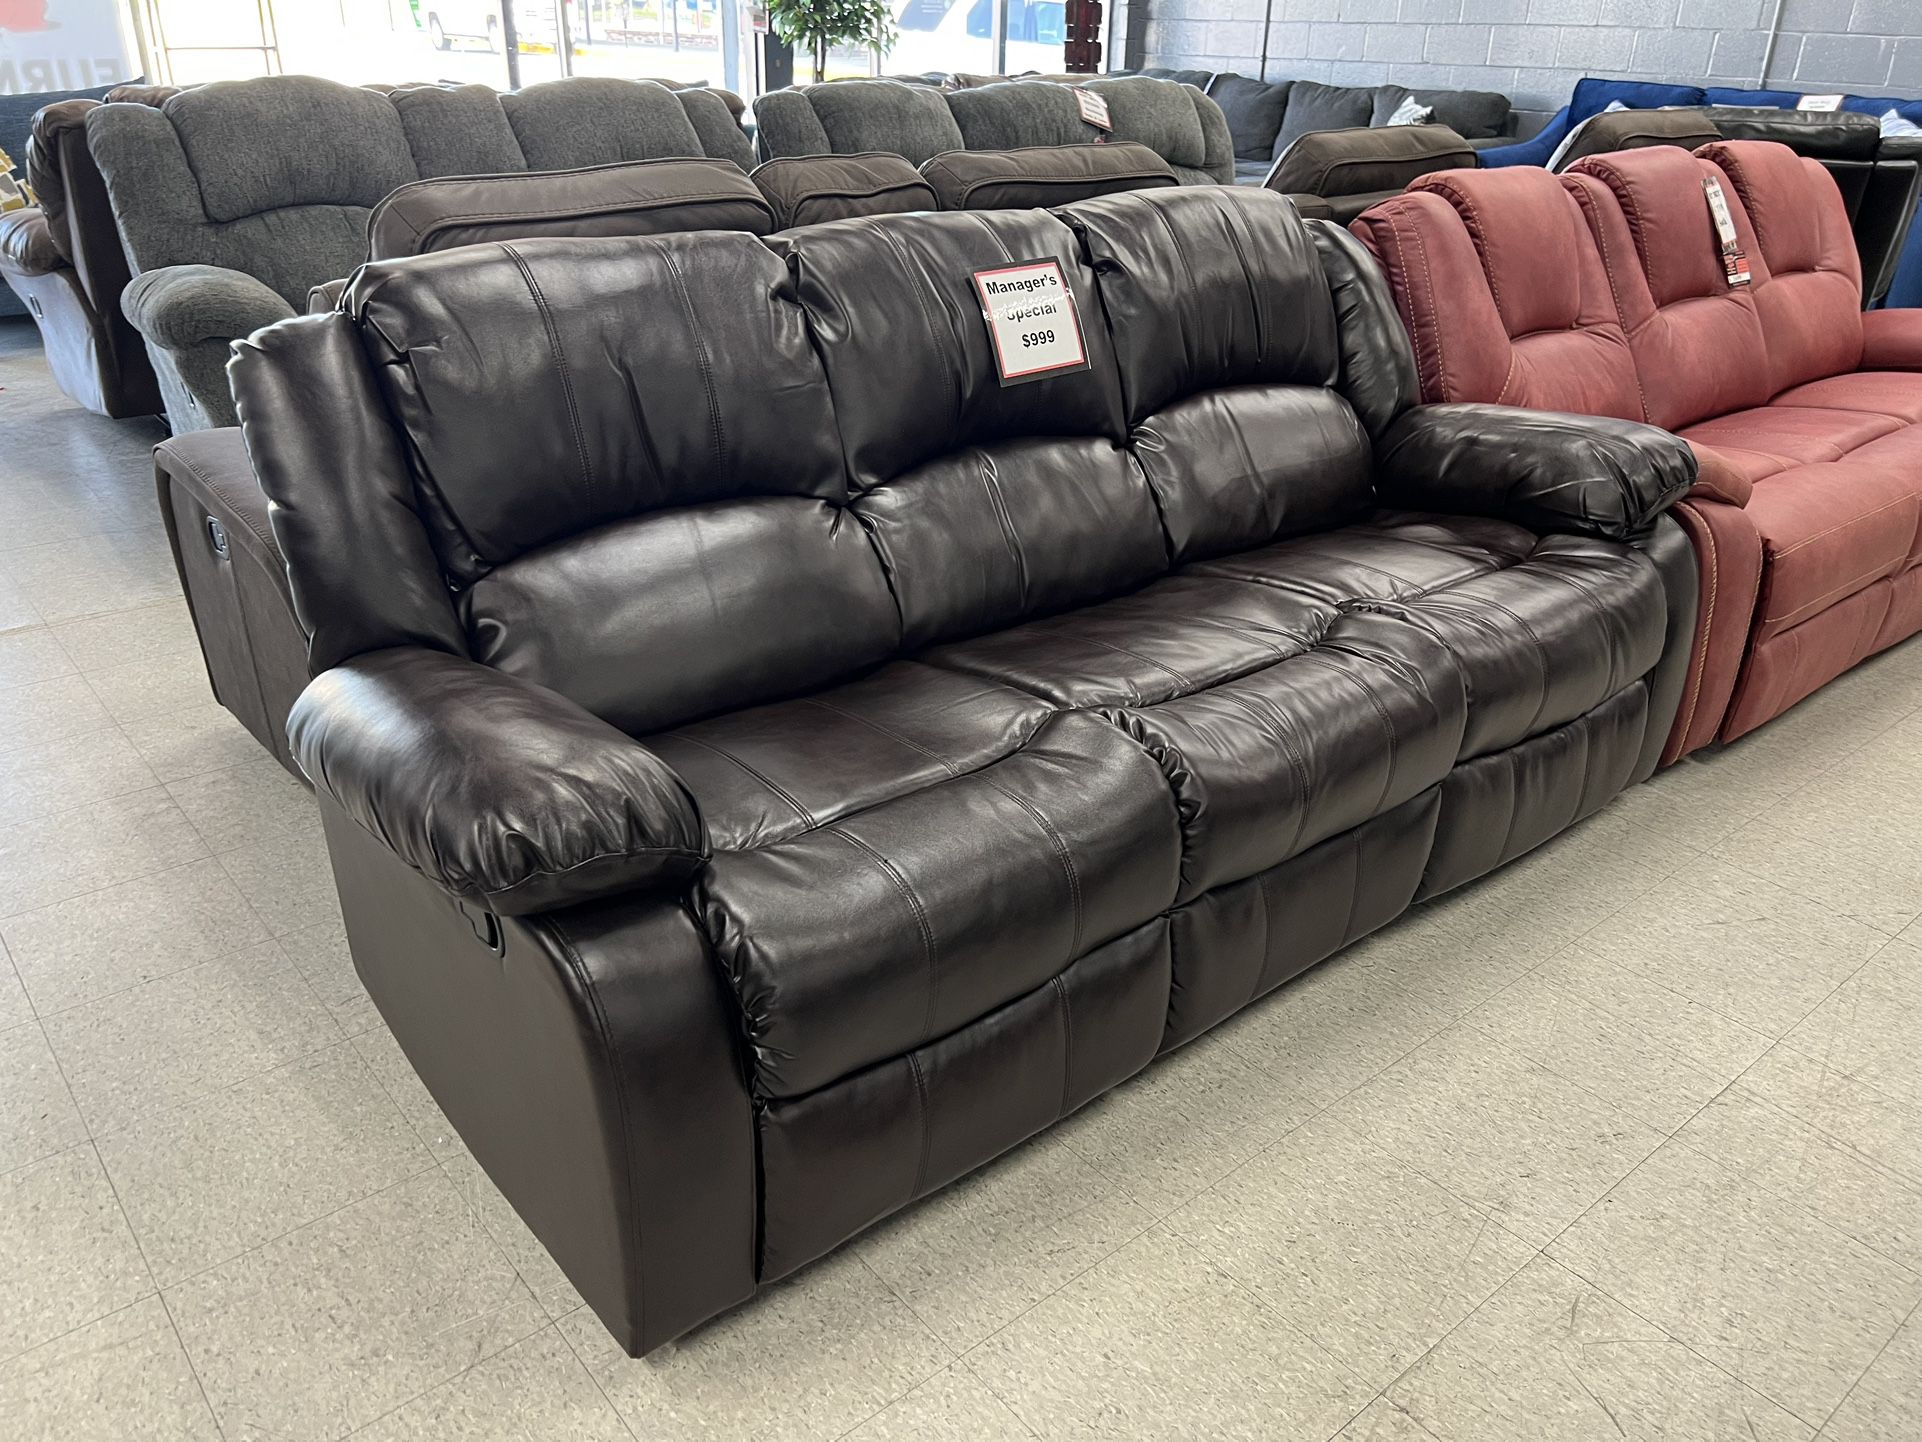 ‼️BLOWOUT SALE‼️ Brand New Reclining Sofa Only $799.00!!